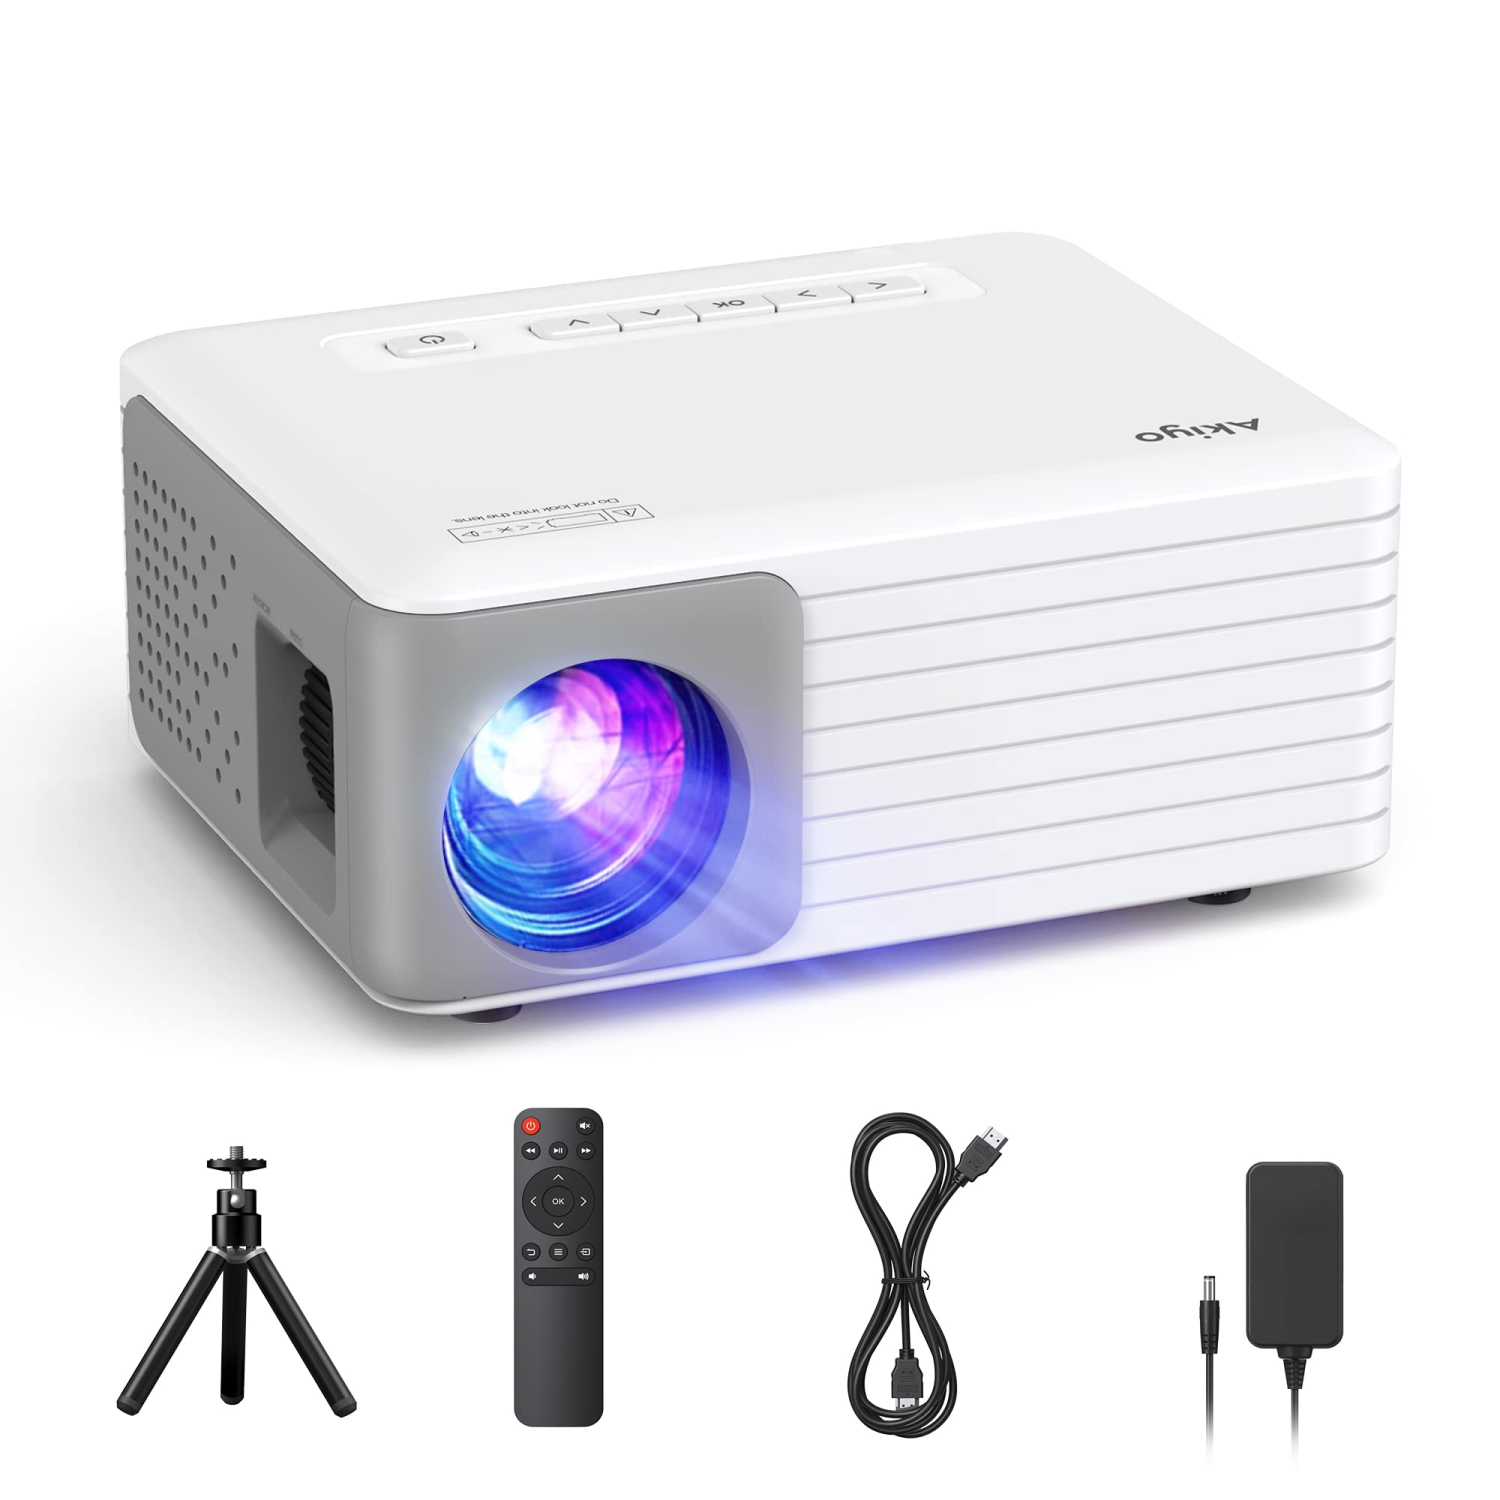 Mini Projector, AKIYO 5500 Lumens Portable Projector with Projector Stand 1080P Supported, 55000 Hours LED Video Projector S